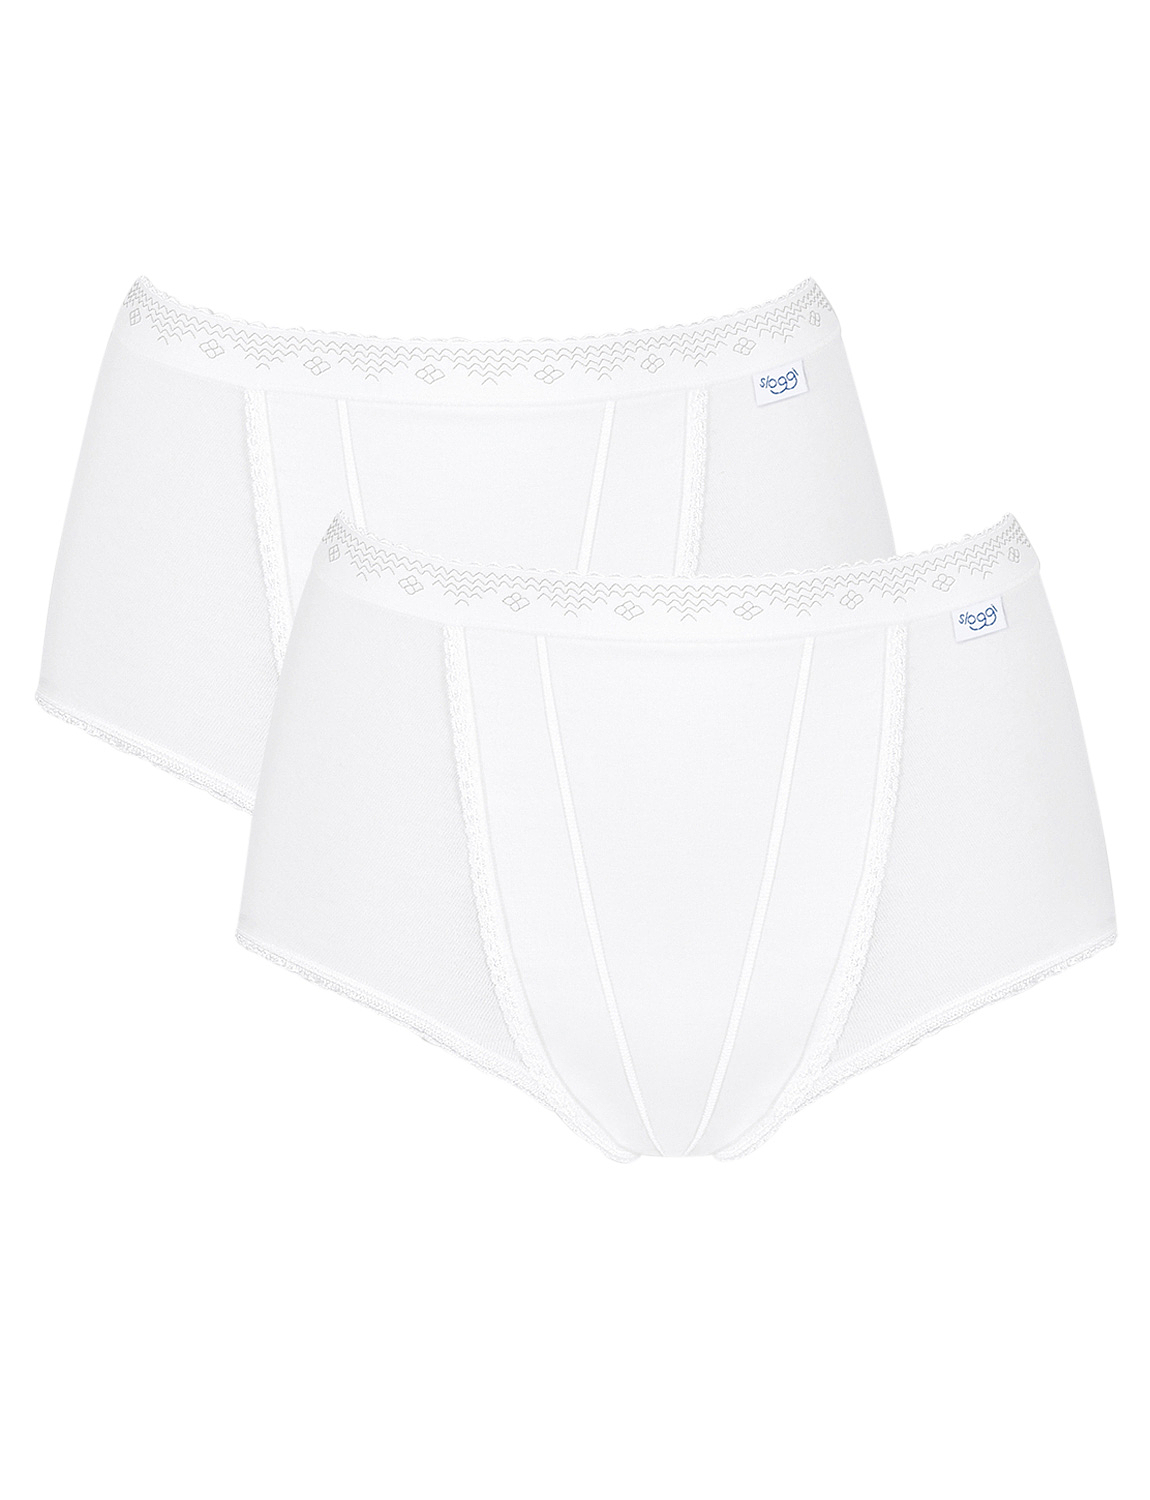 Sloggi 3 Colour Maxi Briefs From Country Collection.